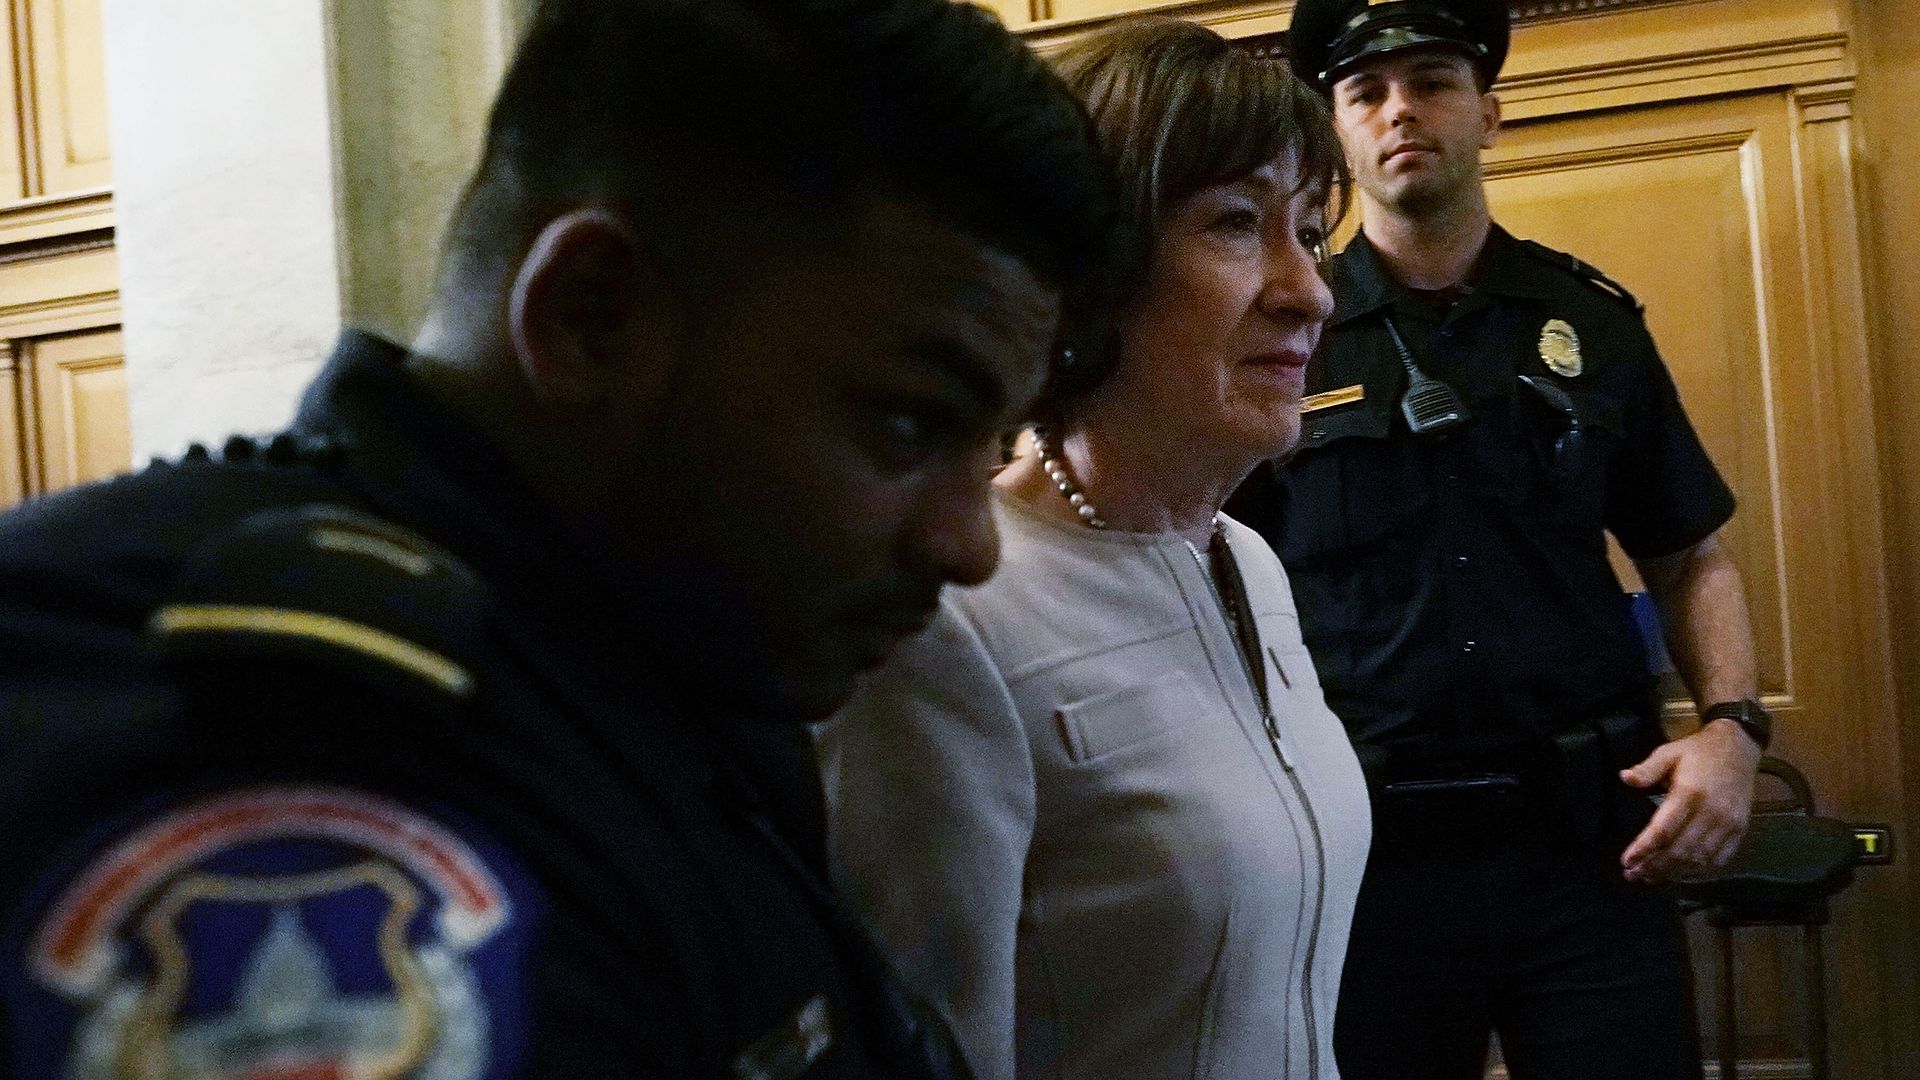 Susan Collins with police officers.